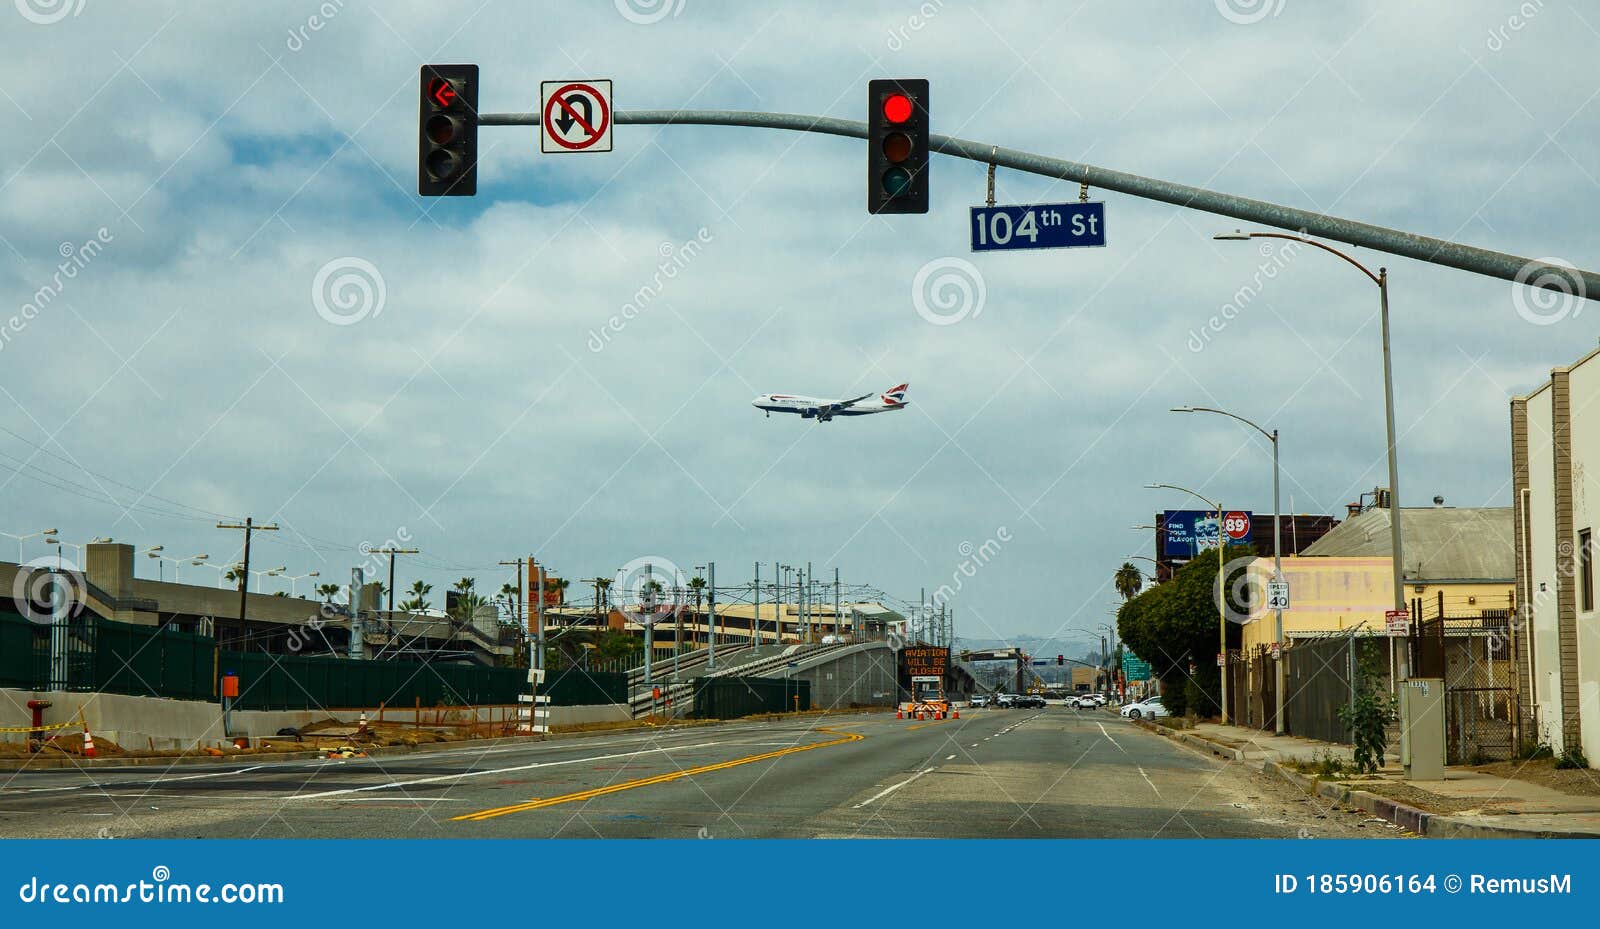 british airways plane with a boeing 747 lands on los angeles airport.